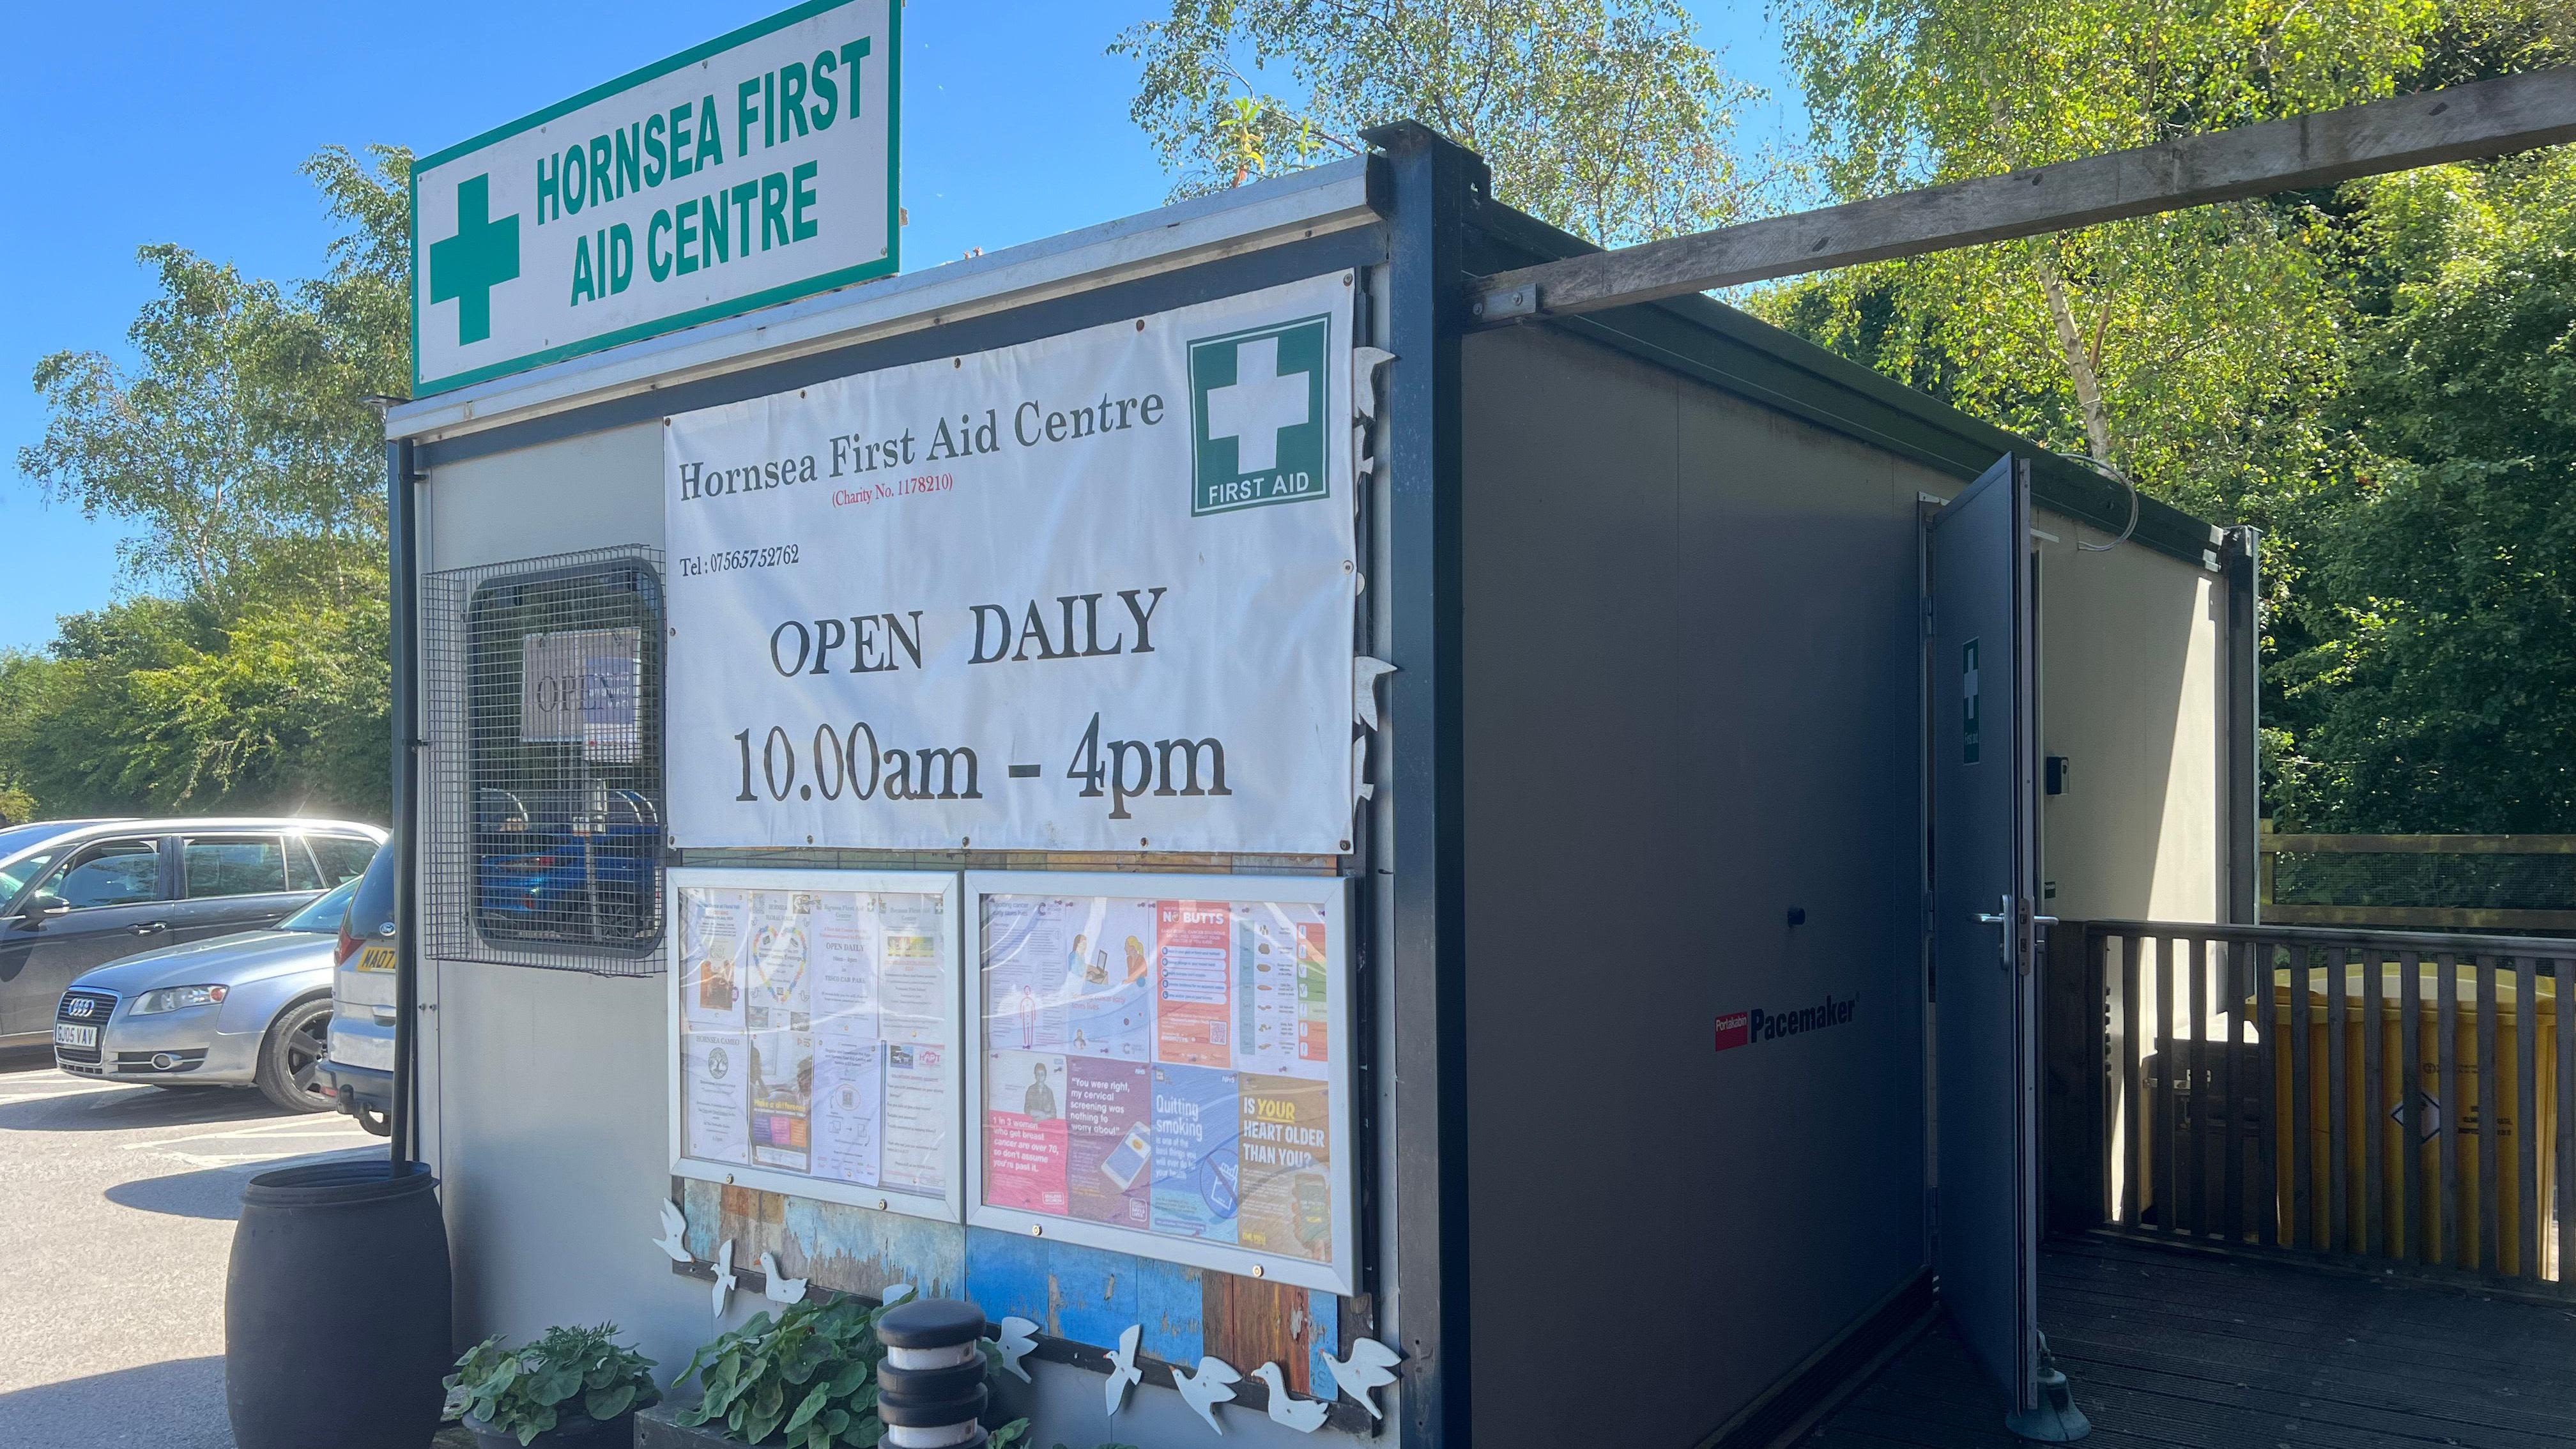 Calls for permanent site for first aid centre